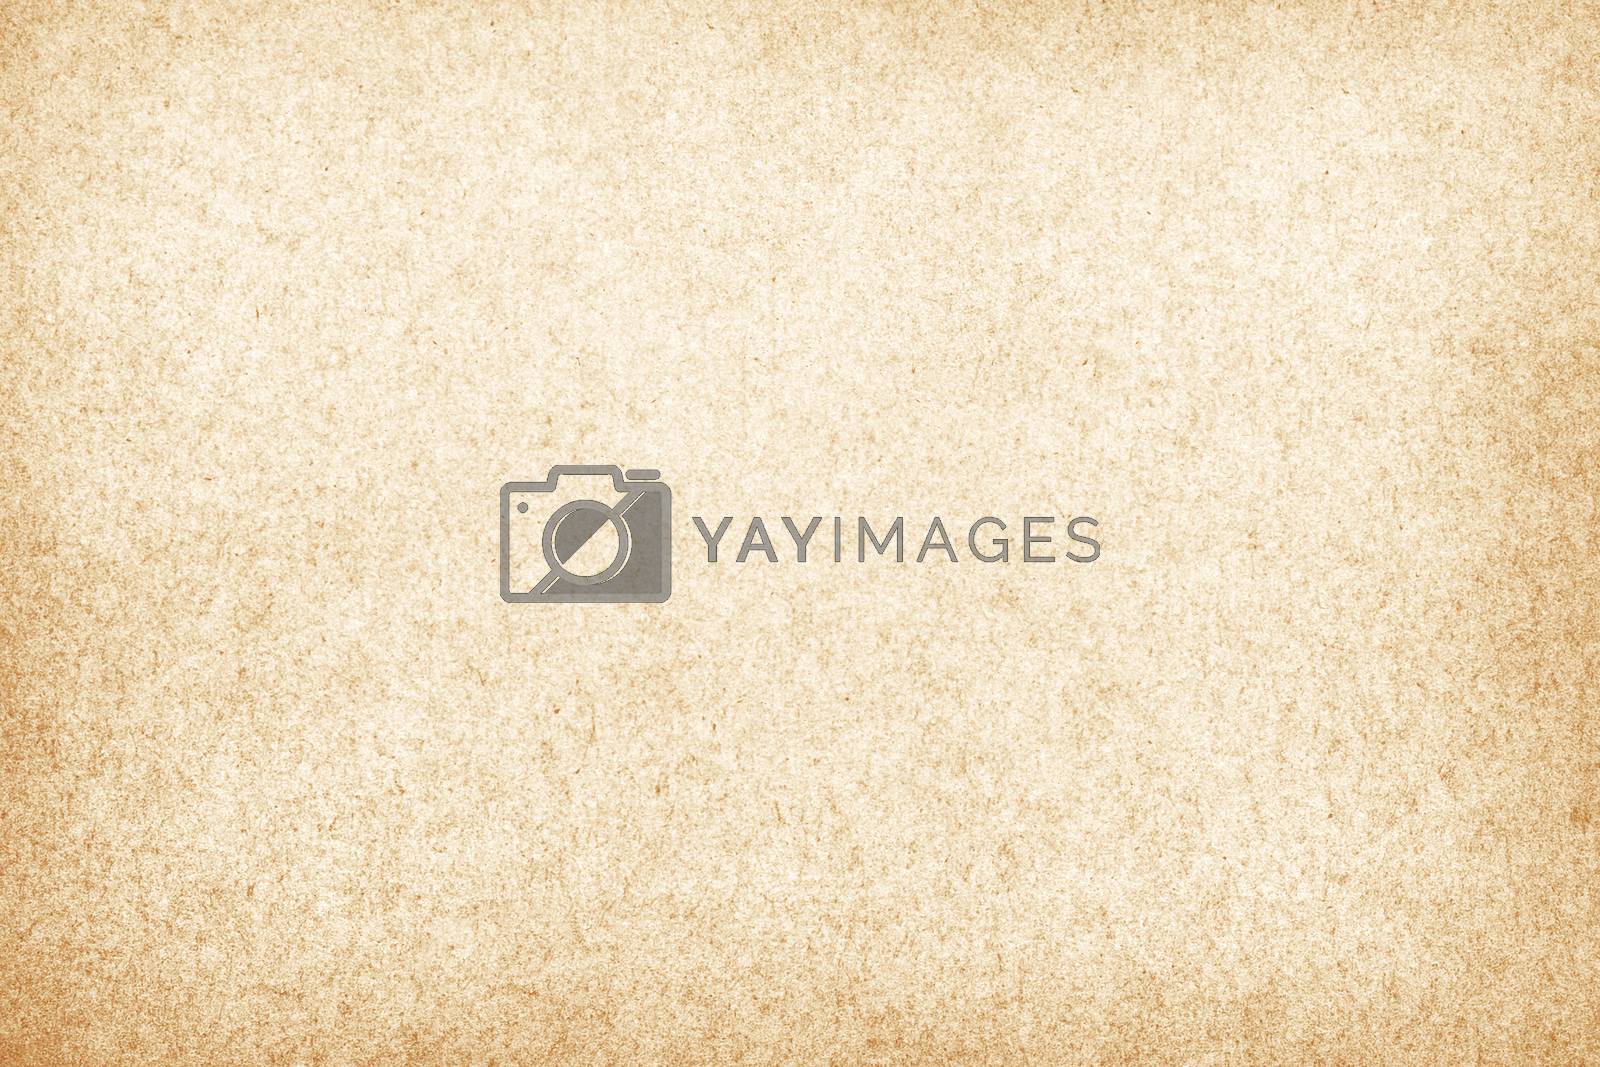 Royalty free image of Brow paper grunge texture background. by Bowonpat